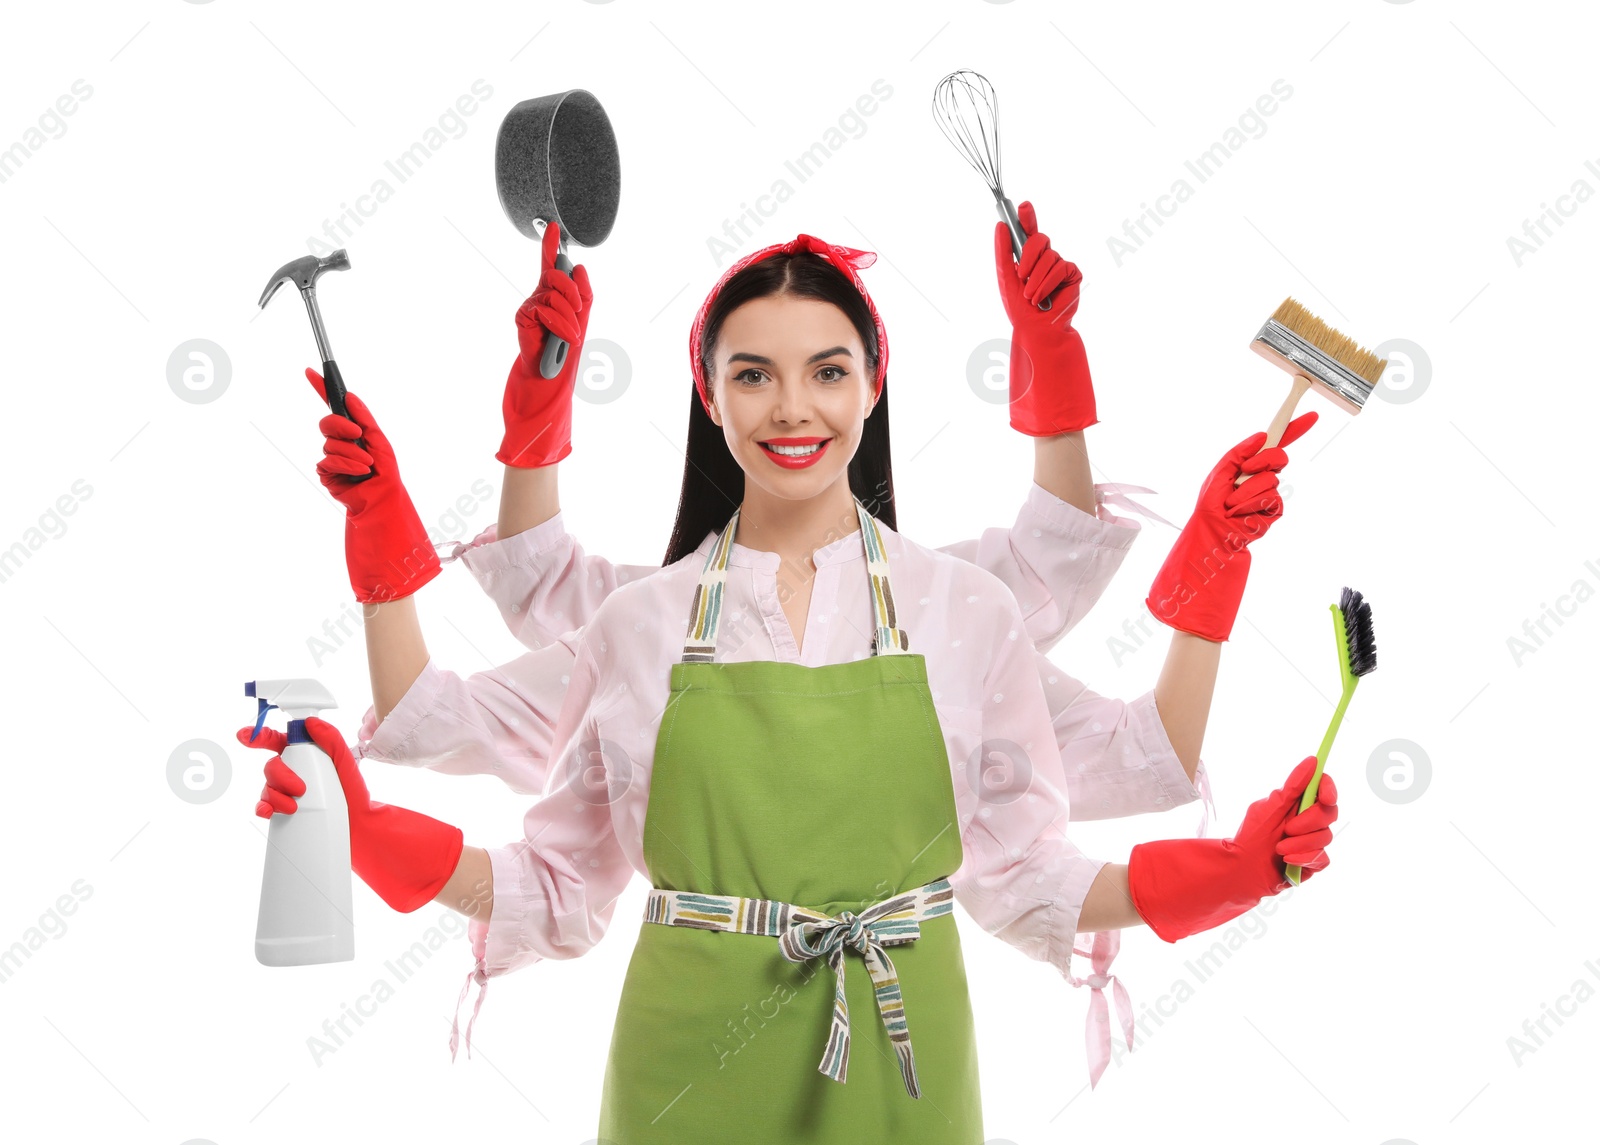 Image of Multitask housewife with many hands holding different stuff on white background